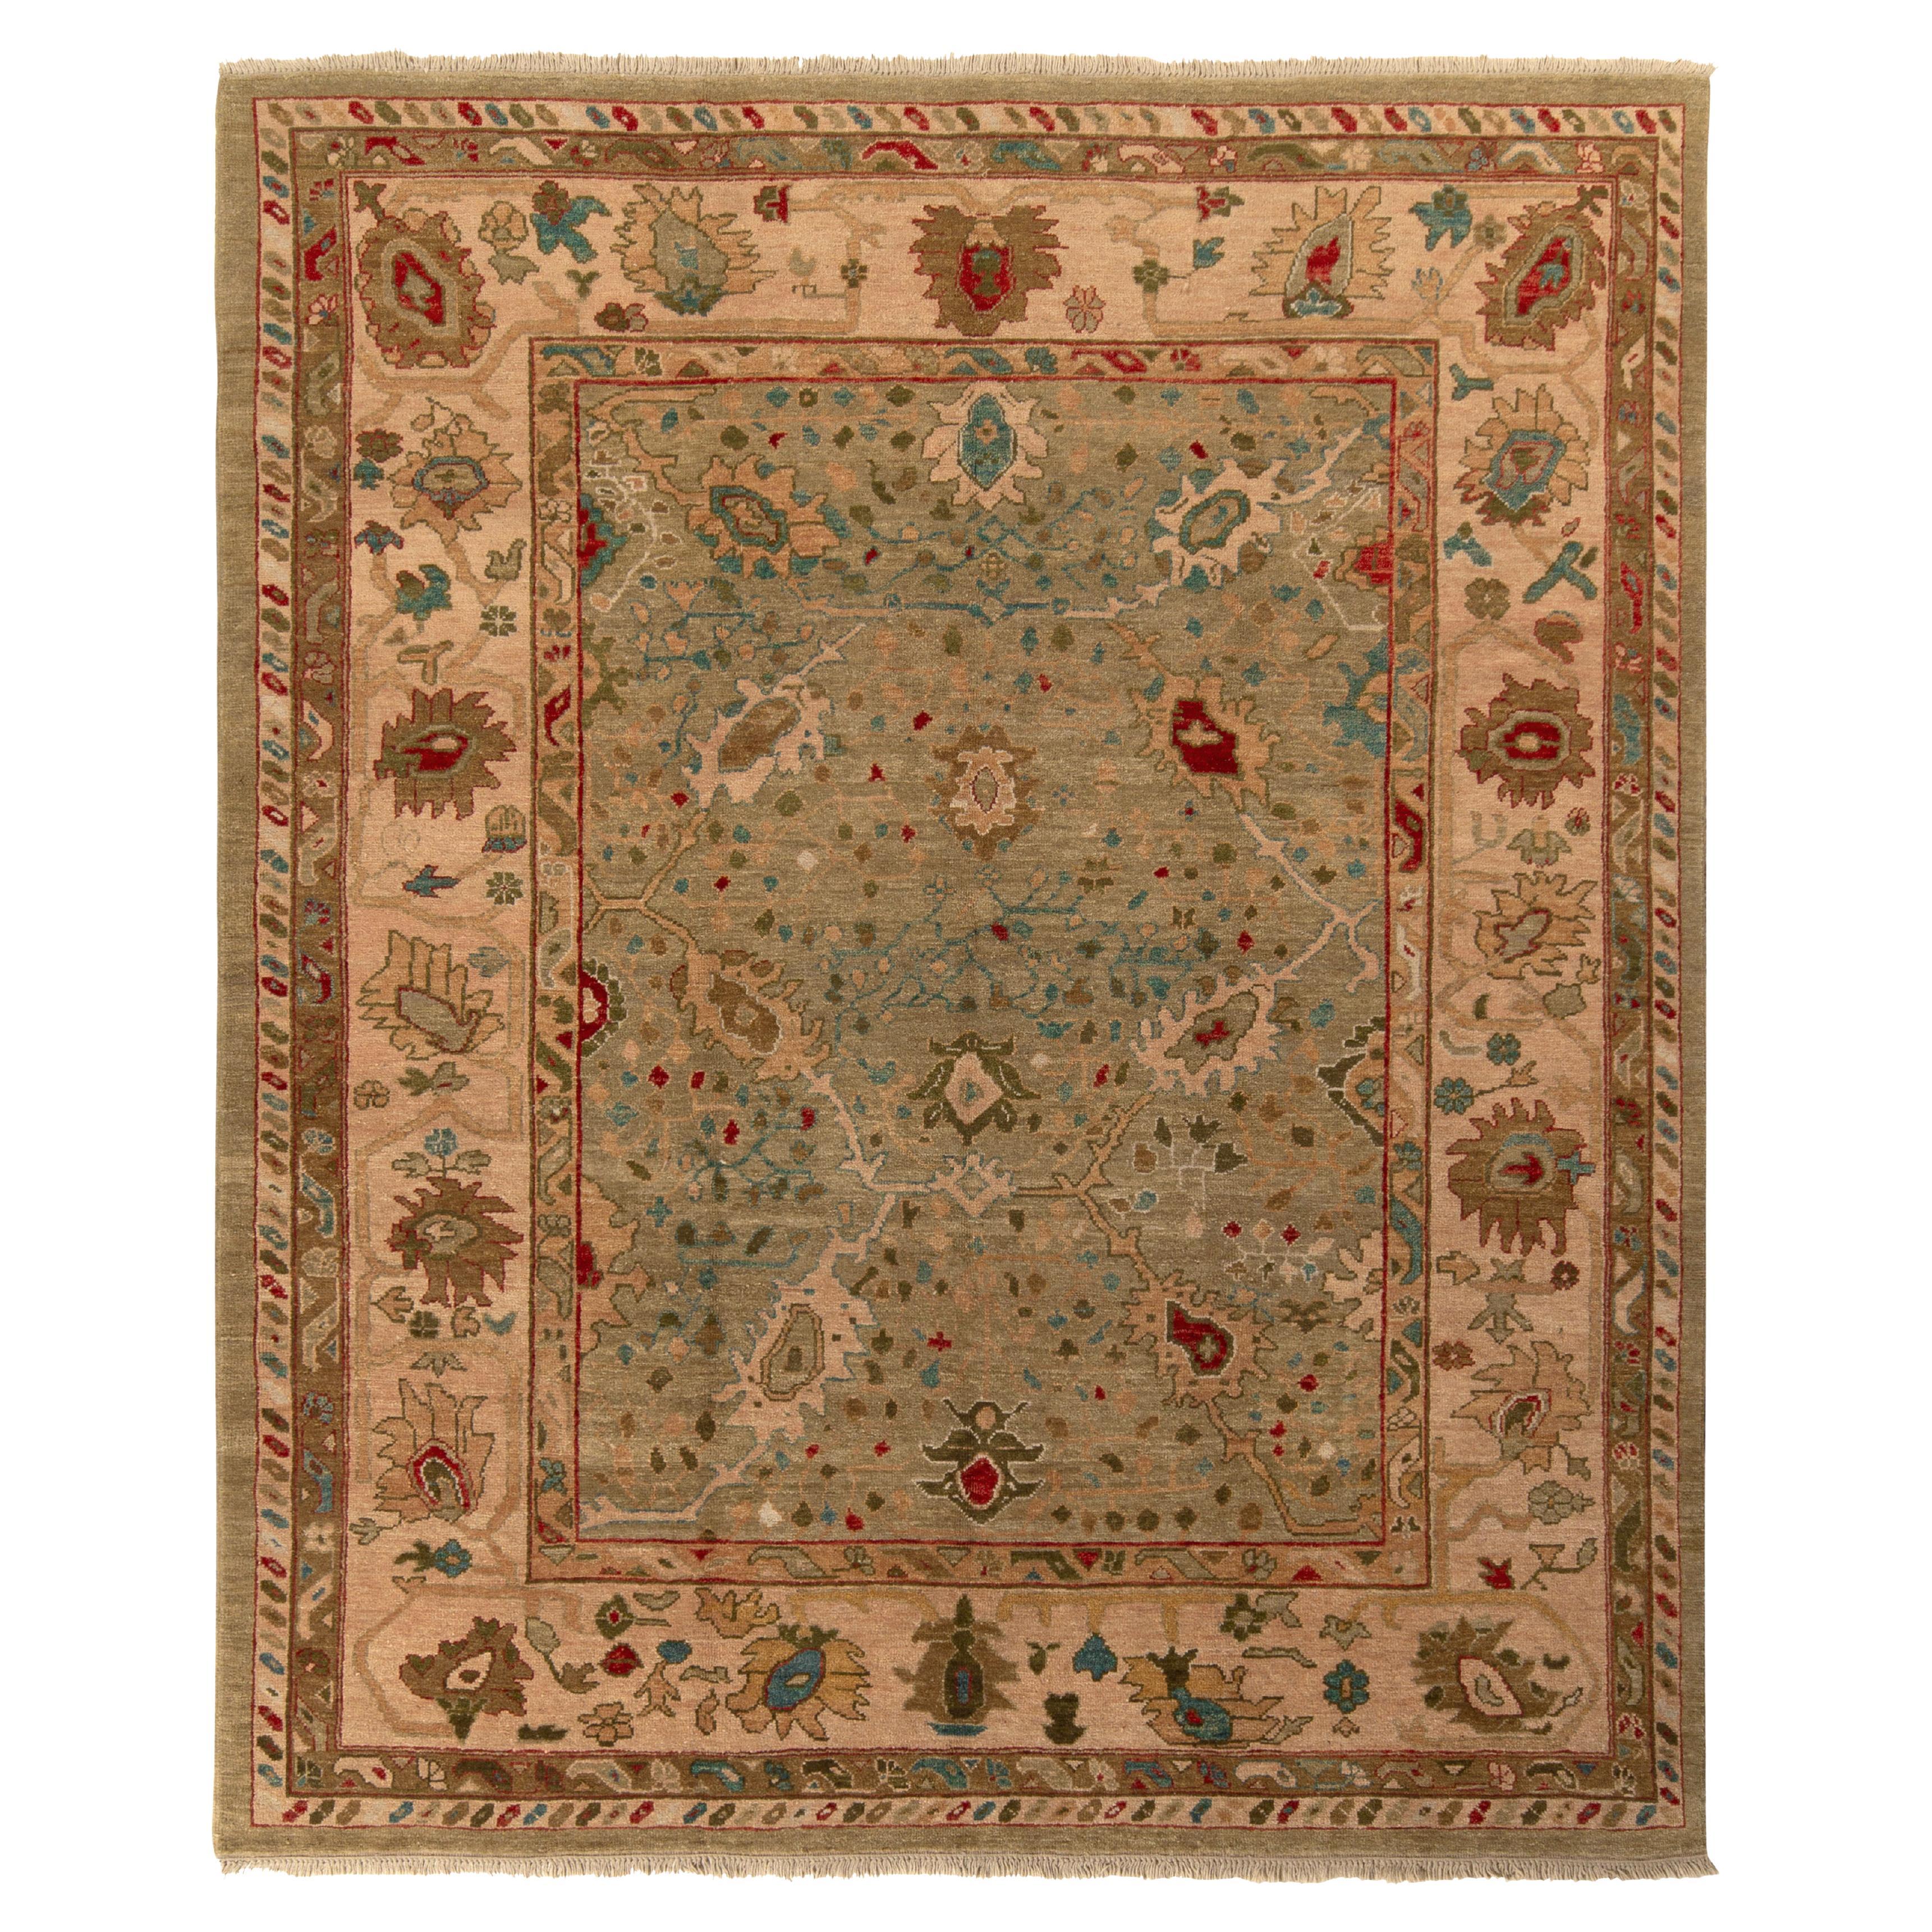 How can I tell if it’s an Oushak rug?